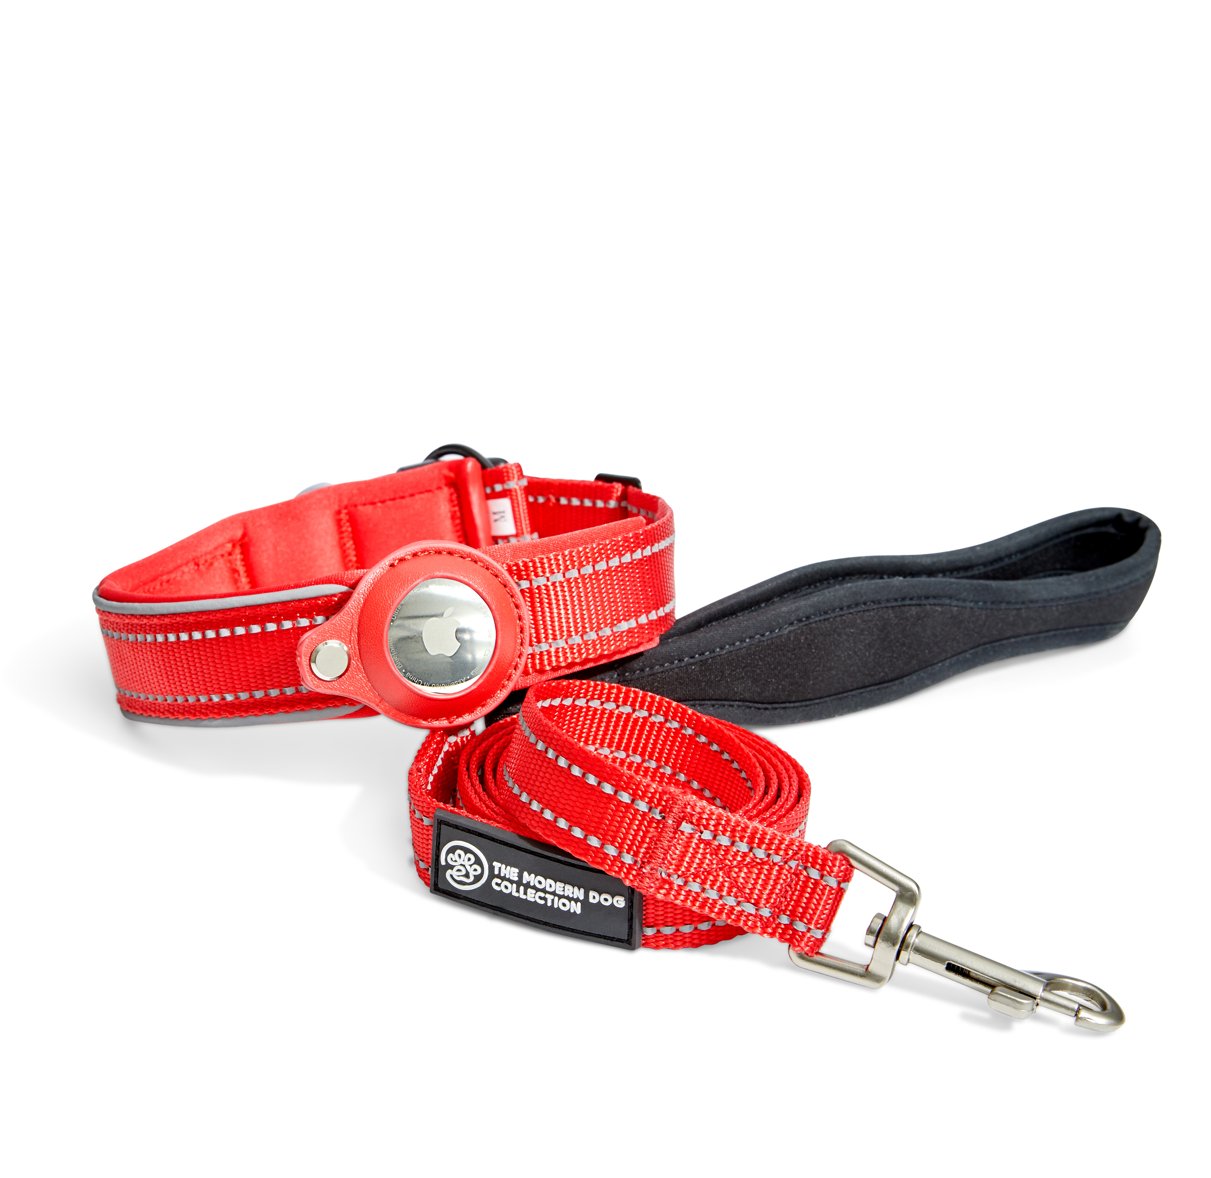 Big Apple collar and leash set in premium red nylon with a luxurious sheen.  Reflective stitching and custom AirTag holder.